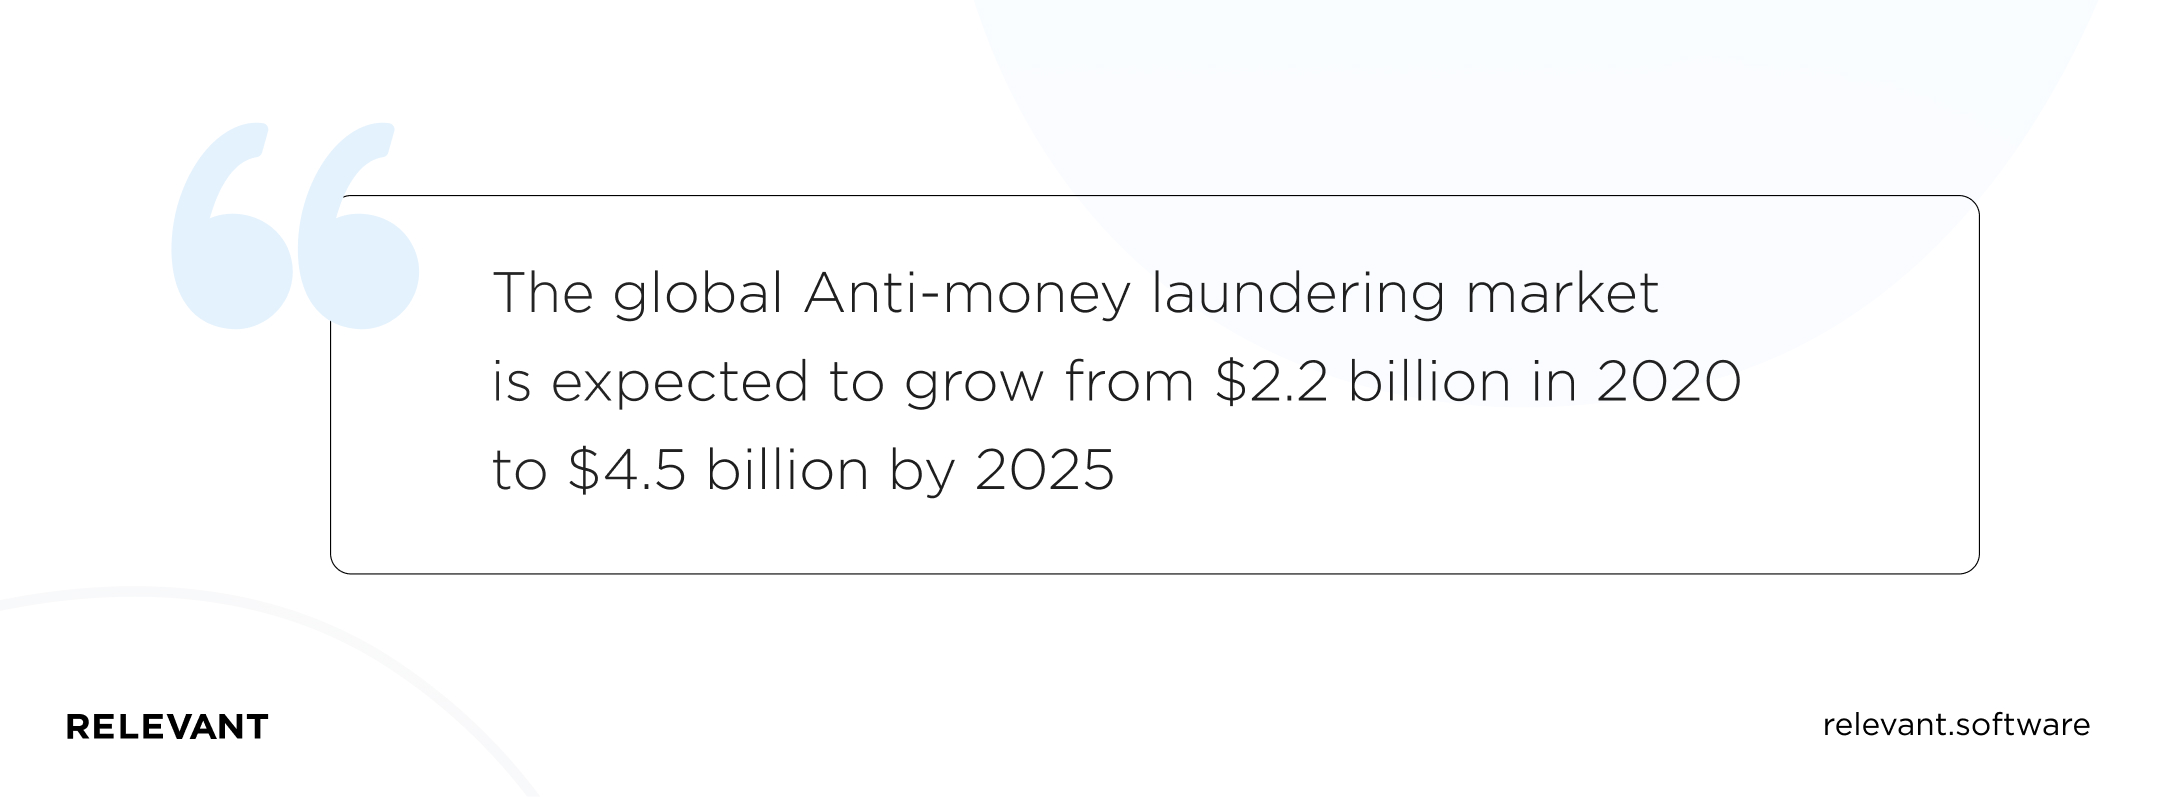 anti-money laundering solutions market size was estimated to grow from USD 2.2 billion to USD 4.5 billion by 2025